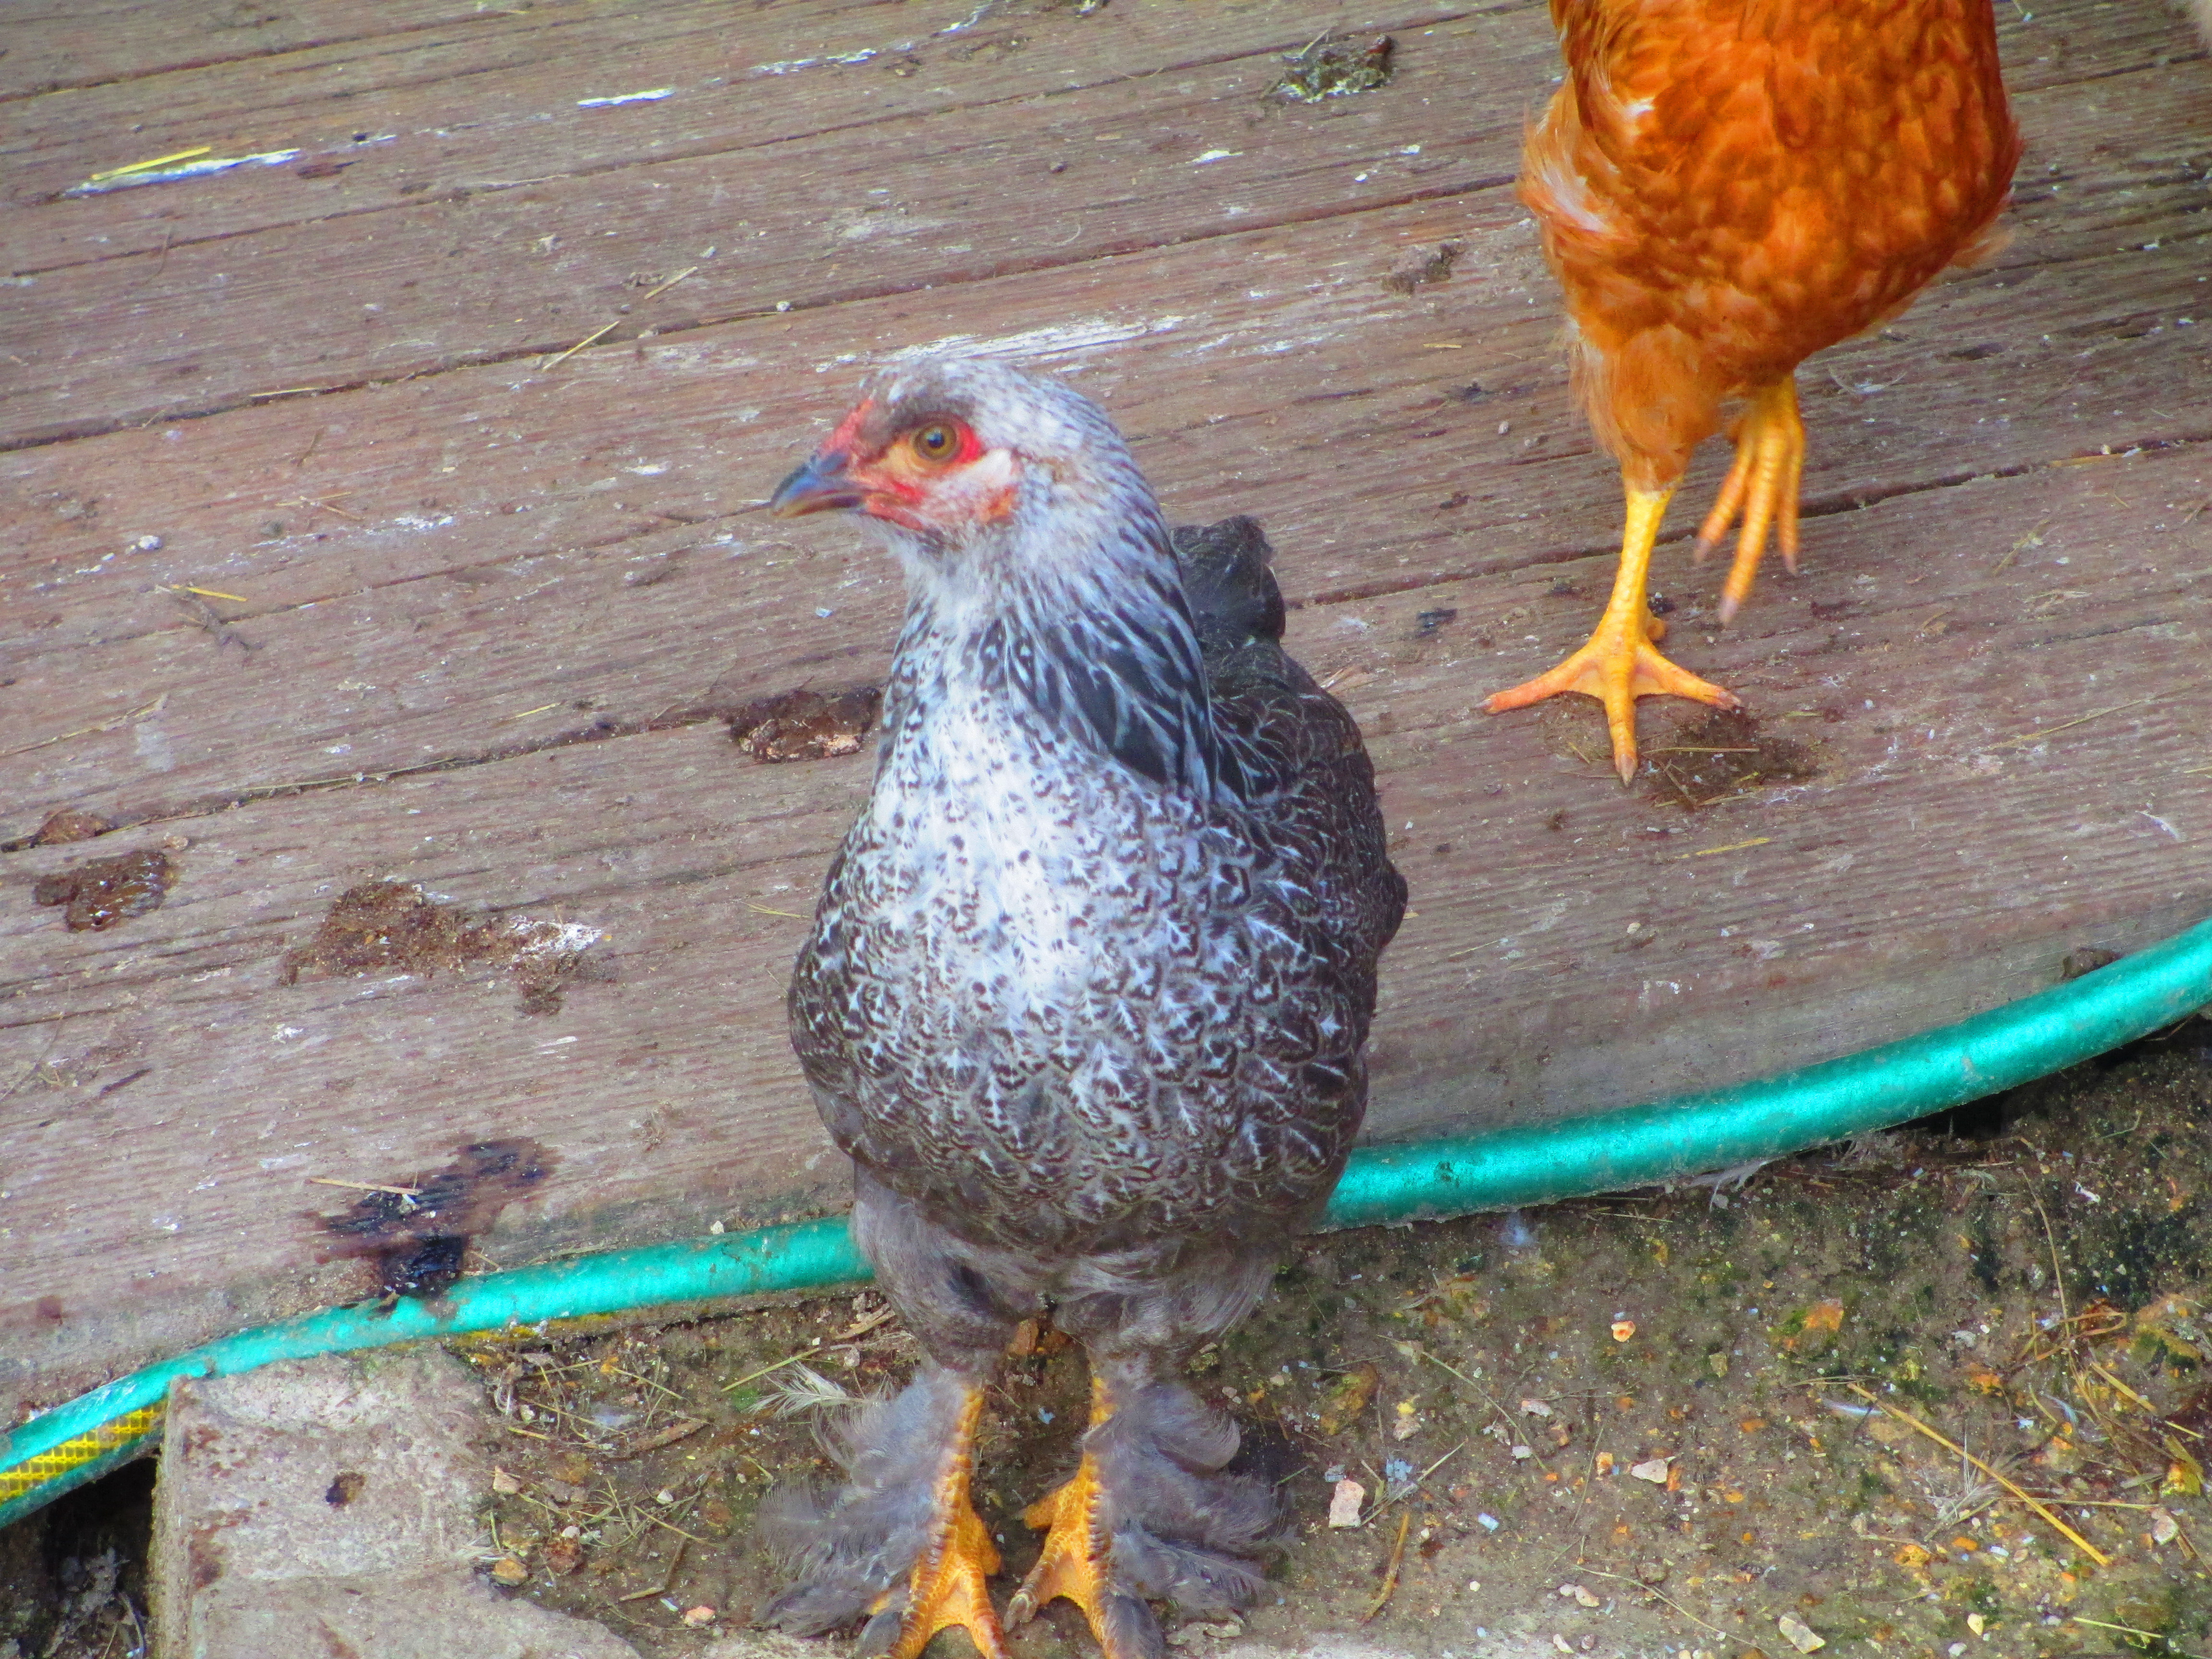 My barred rock hen. She has gotten quite hefty since this picture.